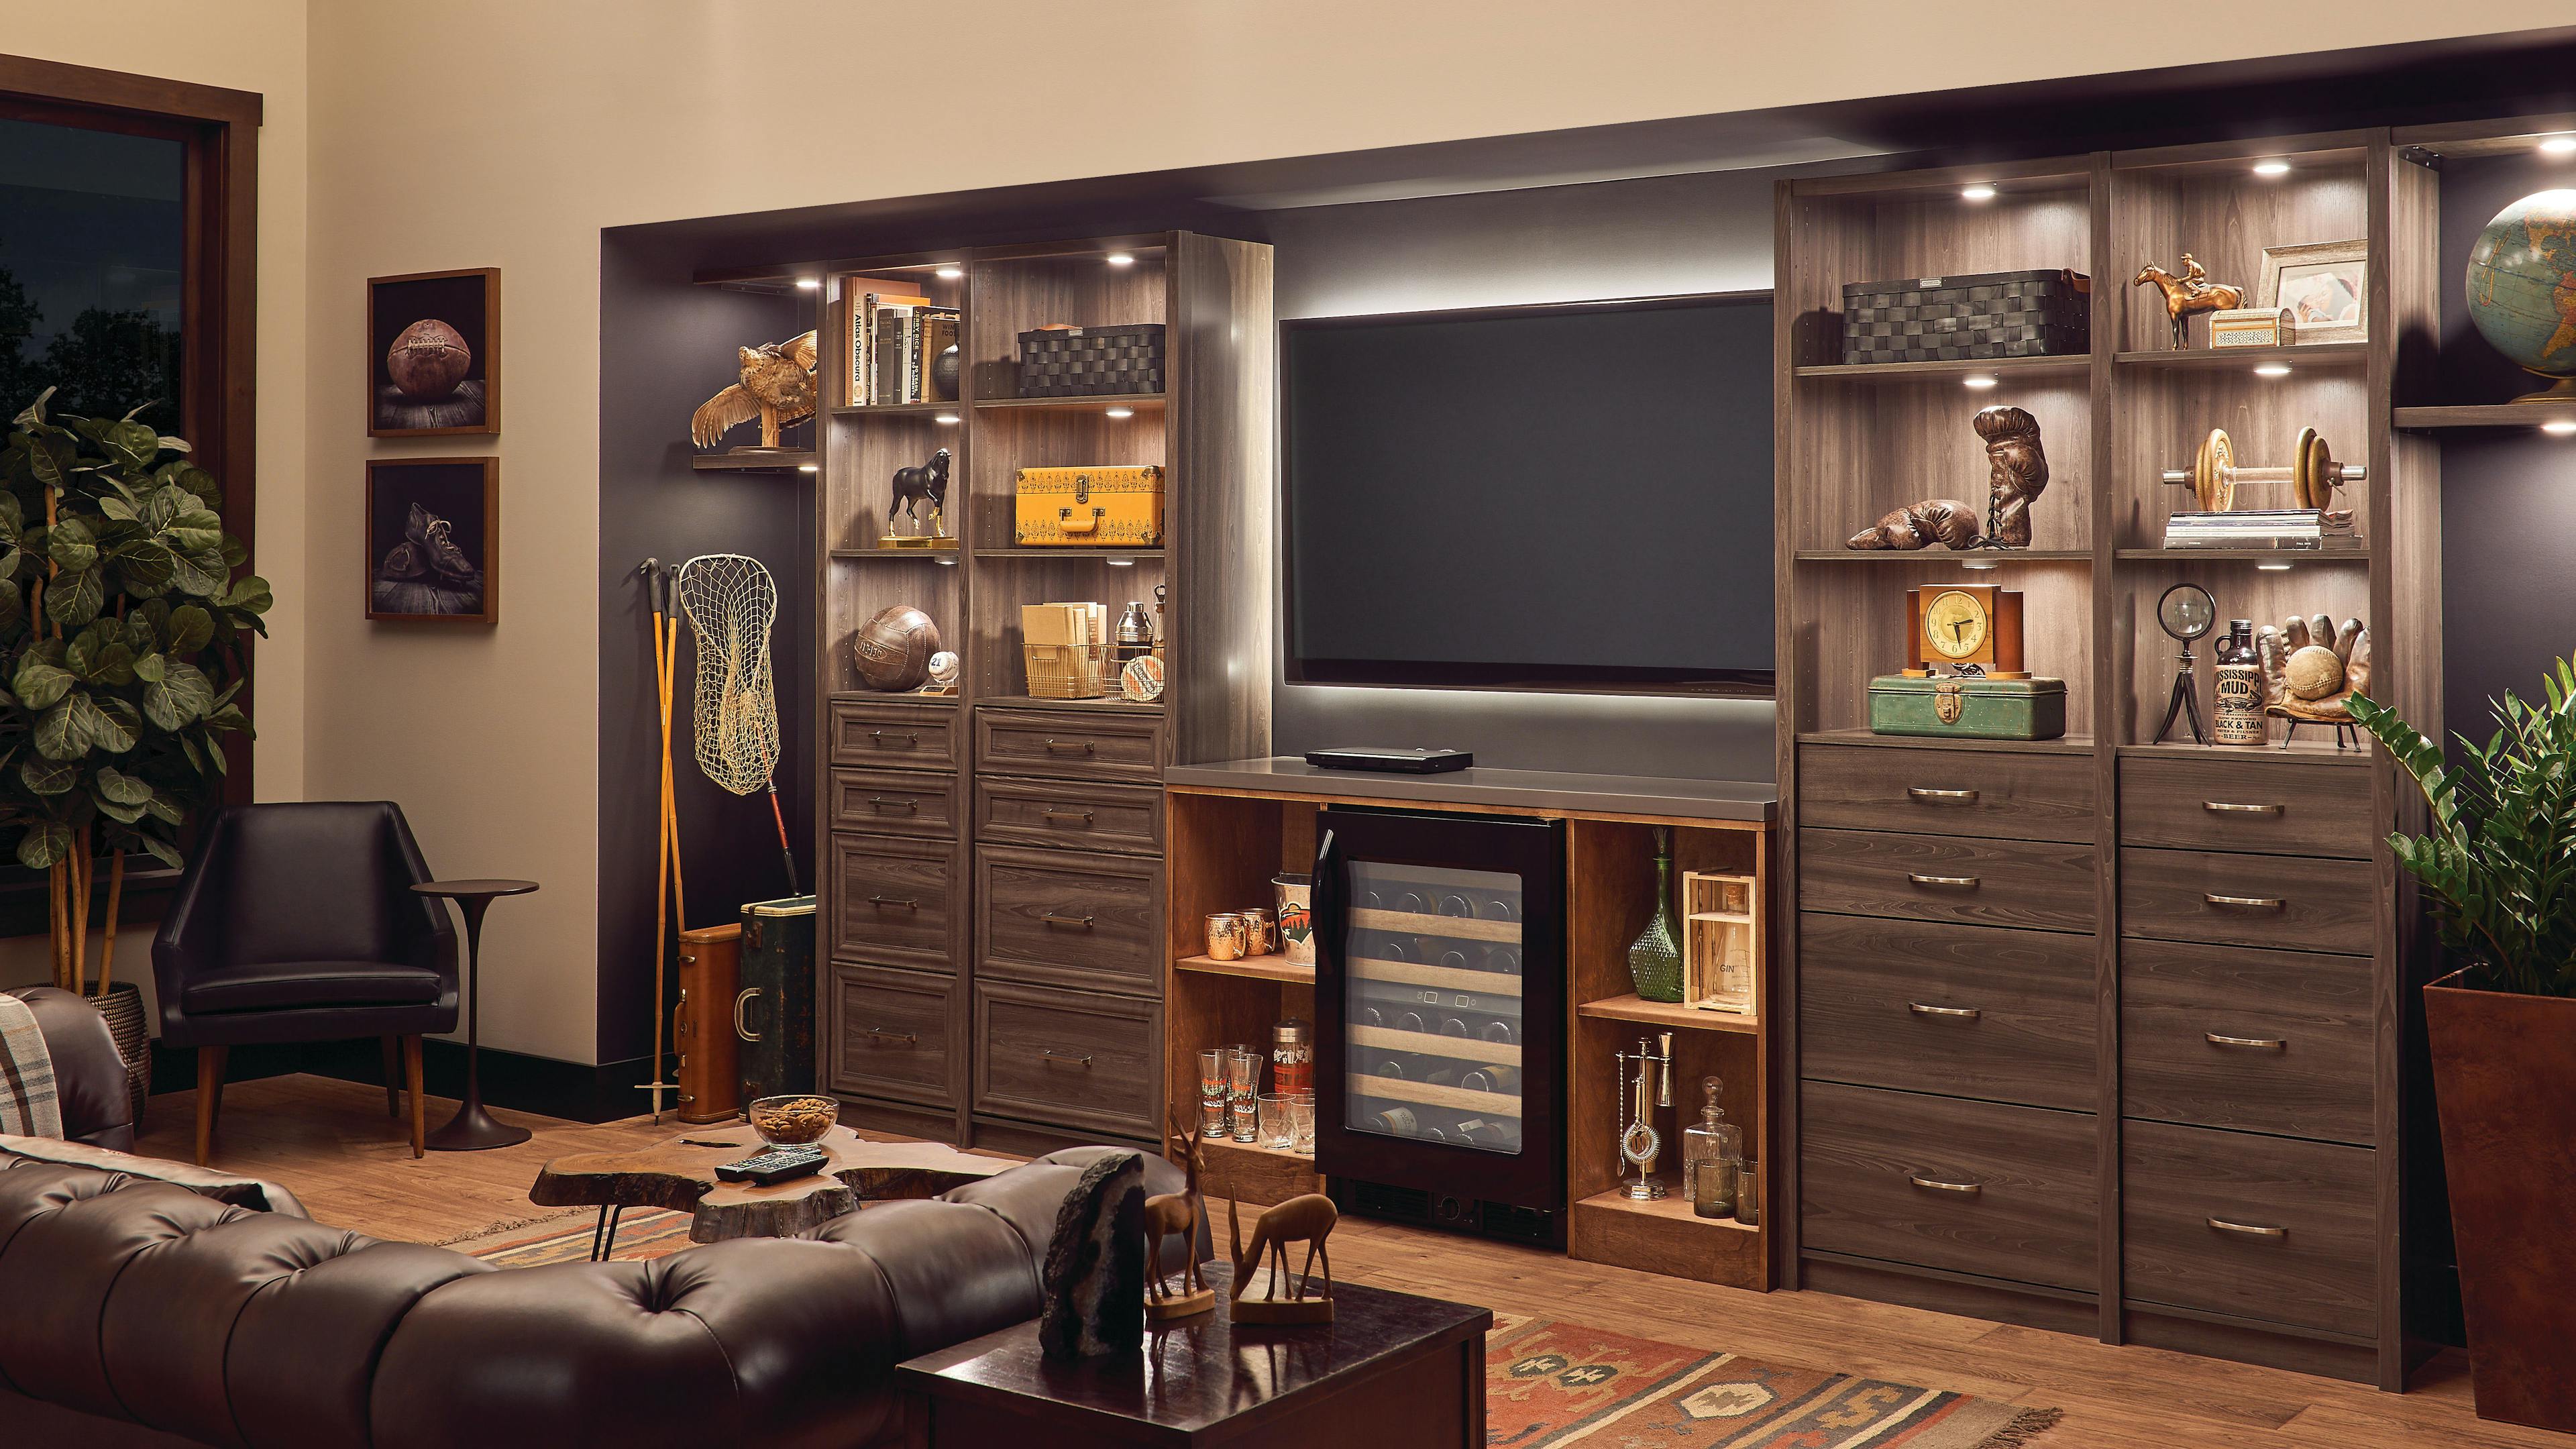 A living room or den with one inset wall lined with cabinet featuring cabinet lights within highlight various collectibles.